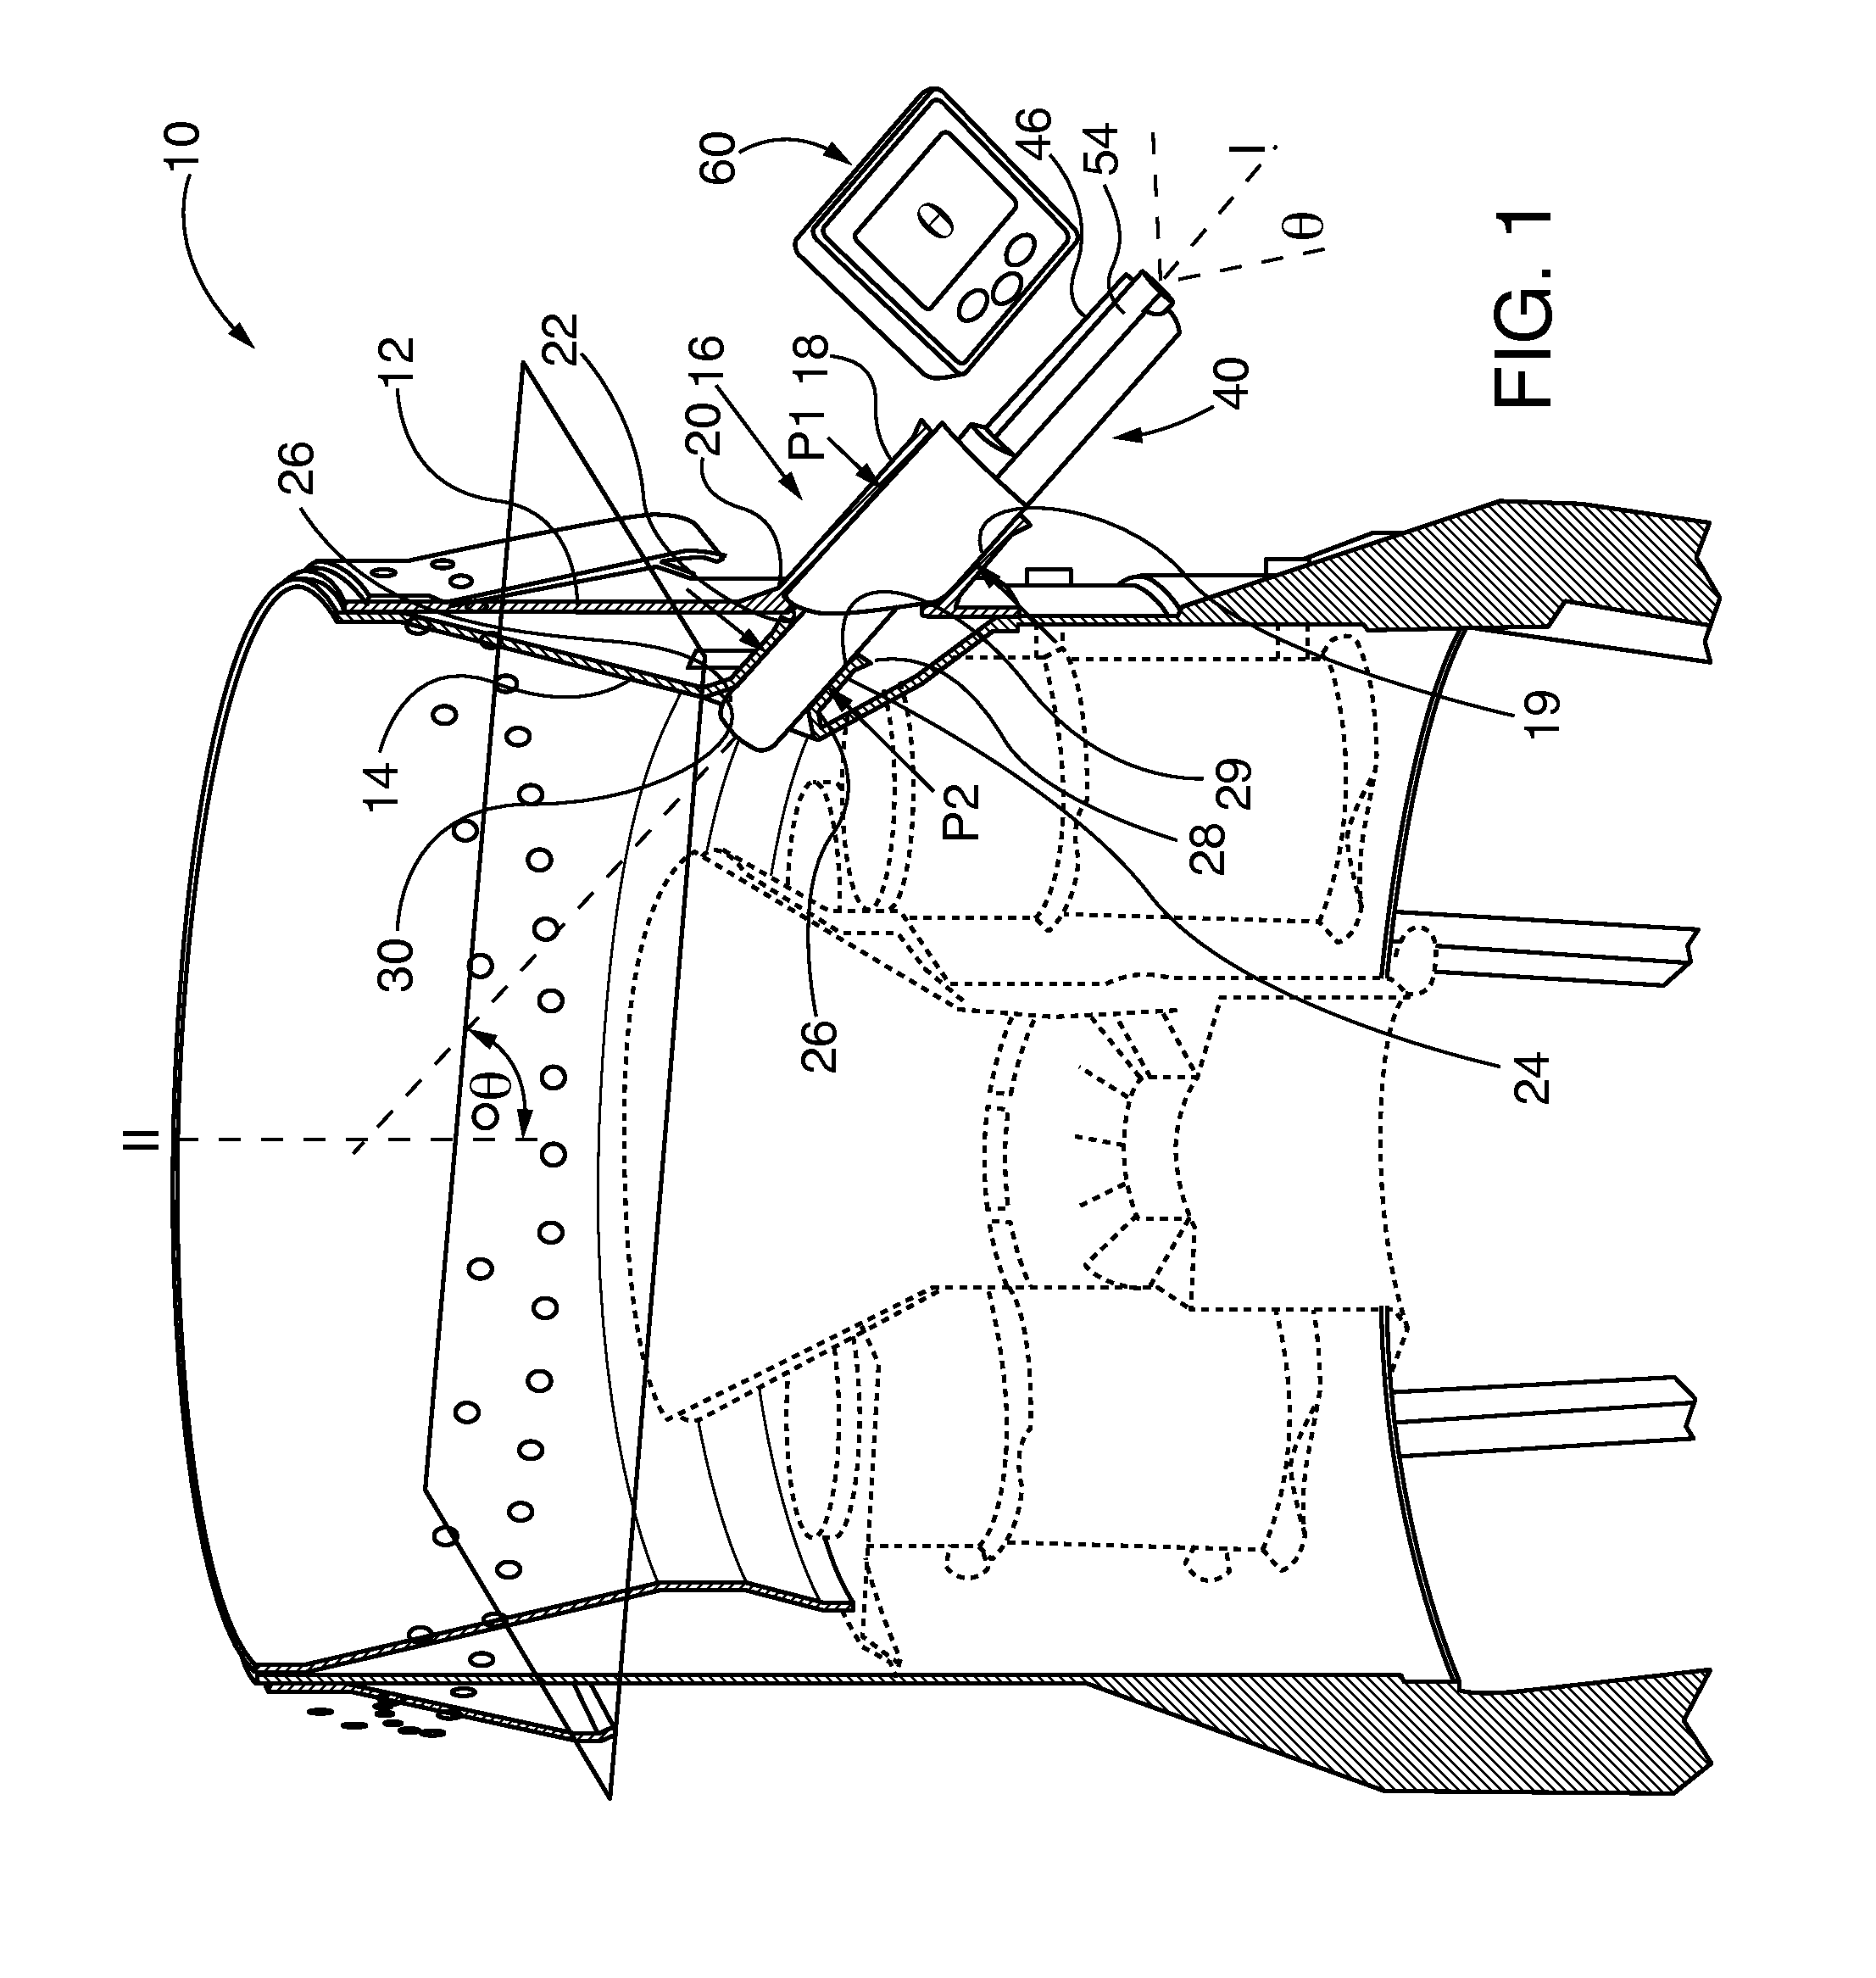 Combustion turbine engine combustor basket igniter port alignment verification tool and method for validating igniter alignment